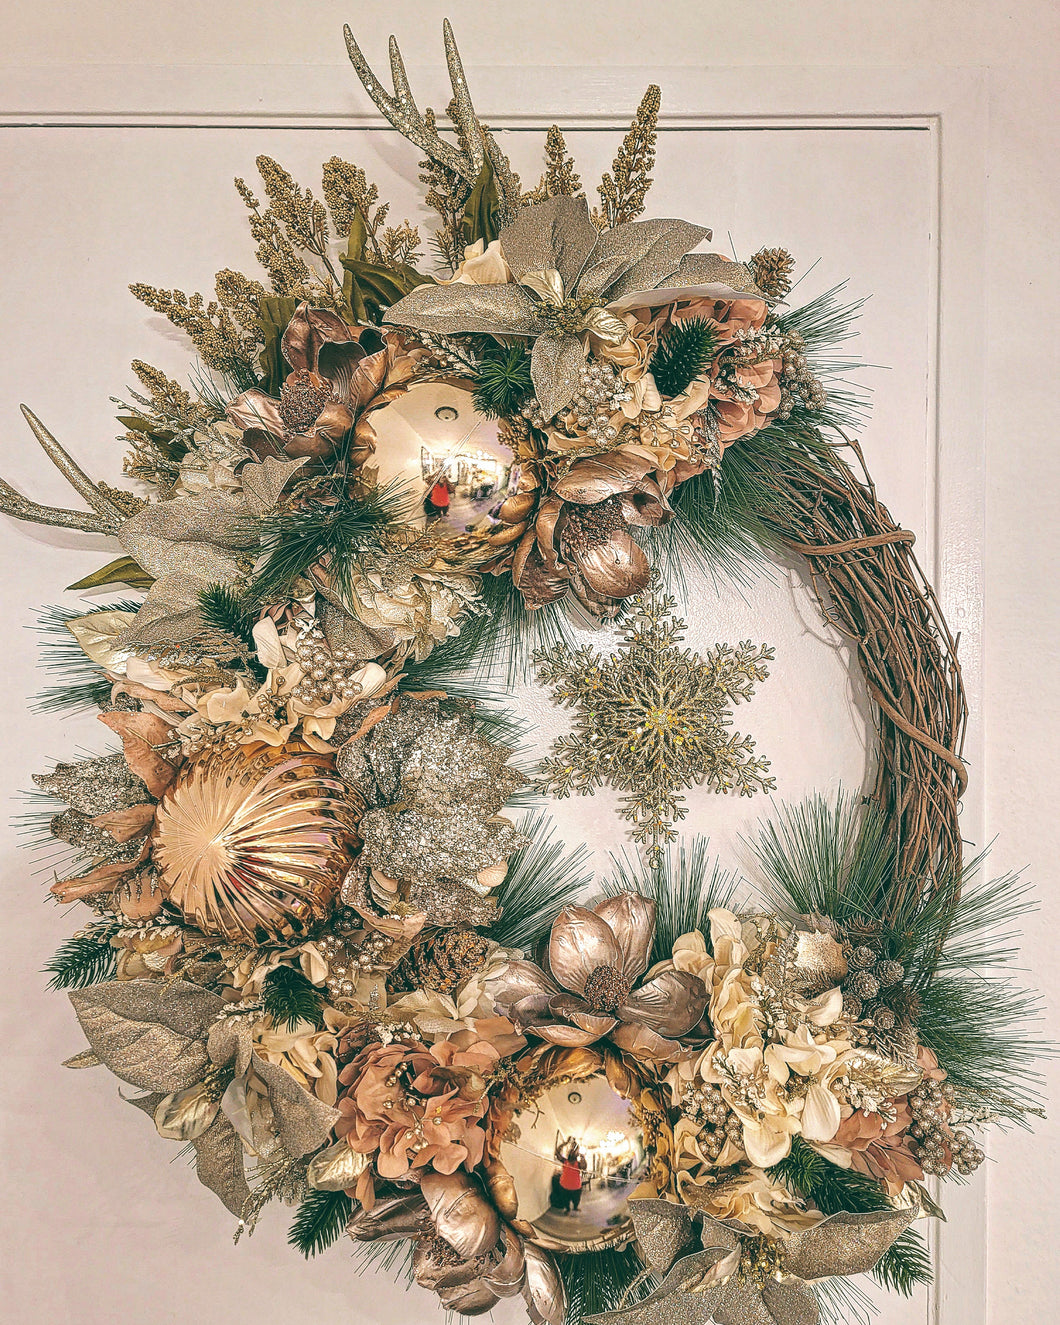 The Rustic Gold Star Fantasy Wreath (Limited Edition)